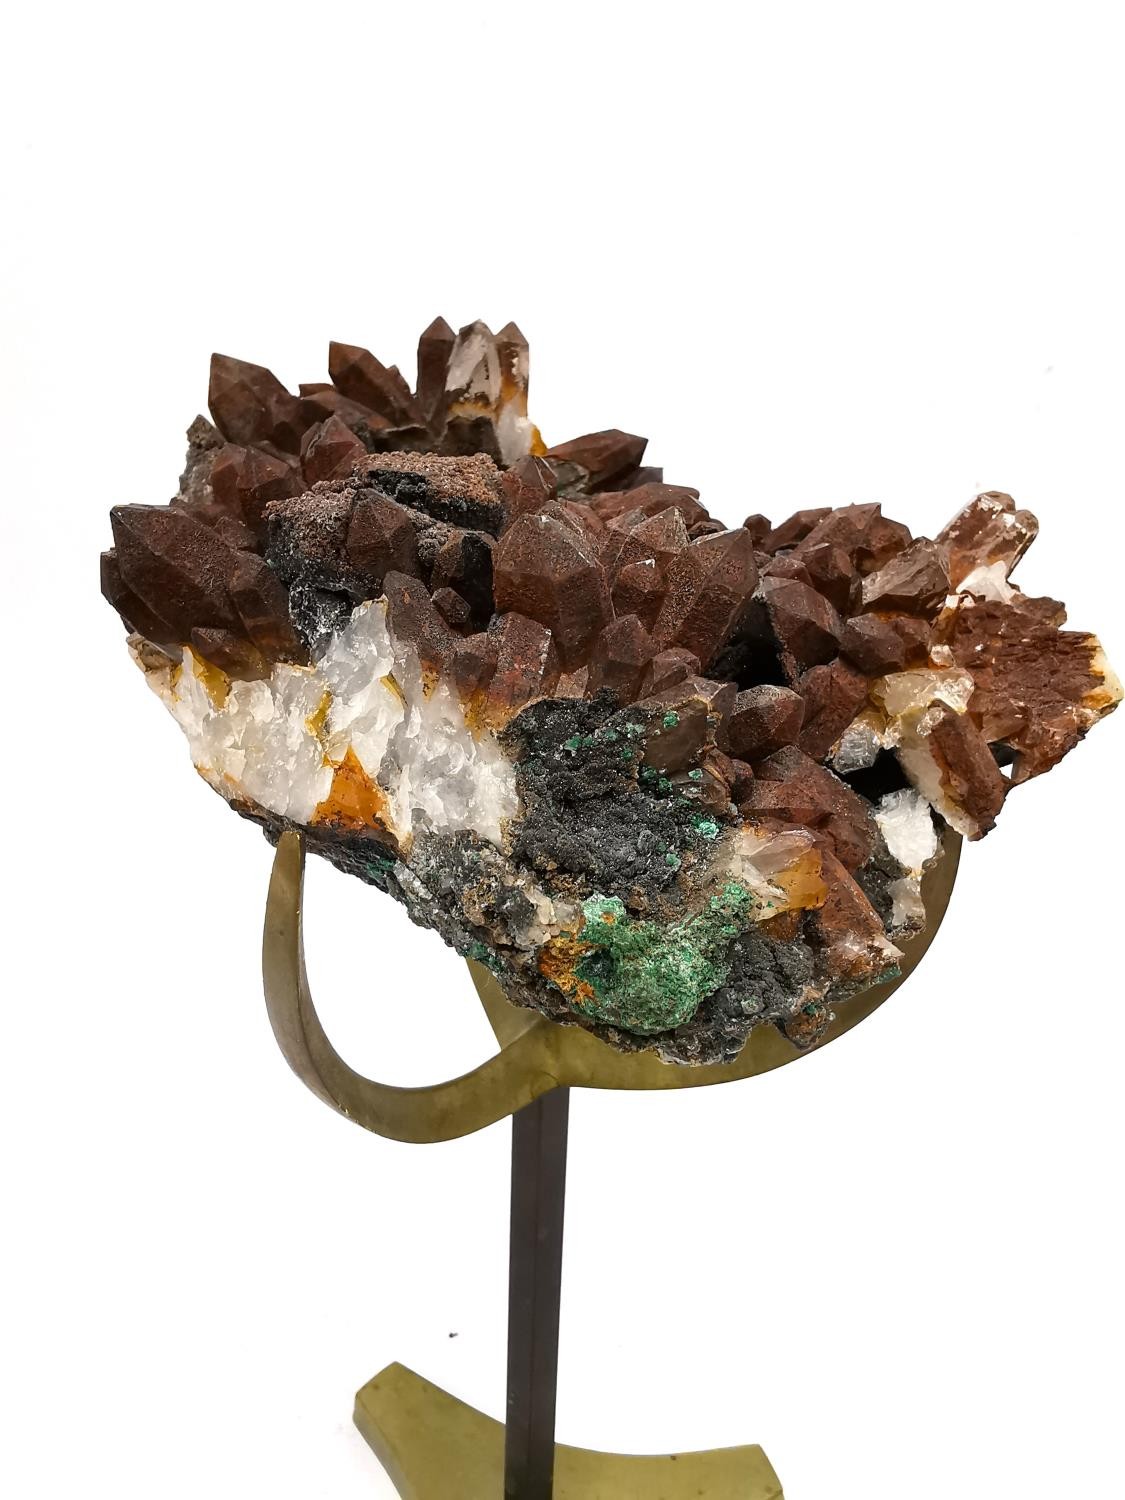 A Limonite stained quartz and malachite crystal specimen from Durango, Mexico. Mounted on brass - Image 6 of 8